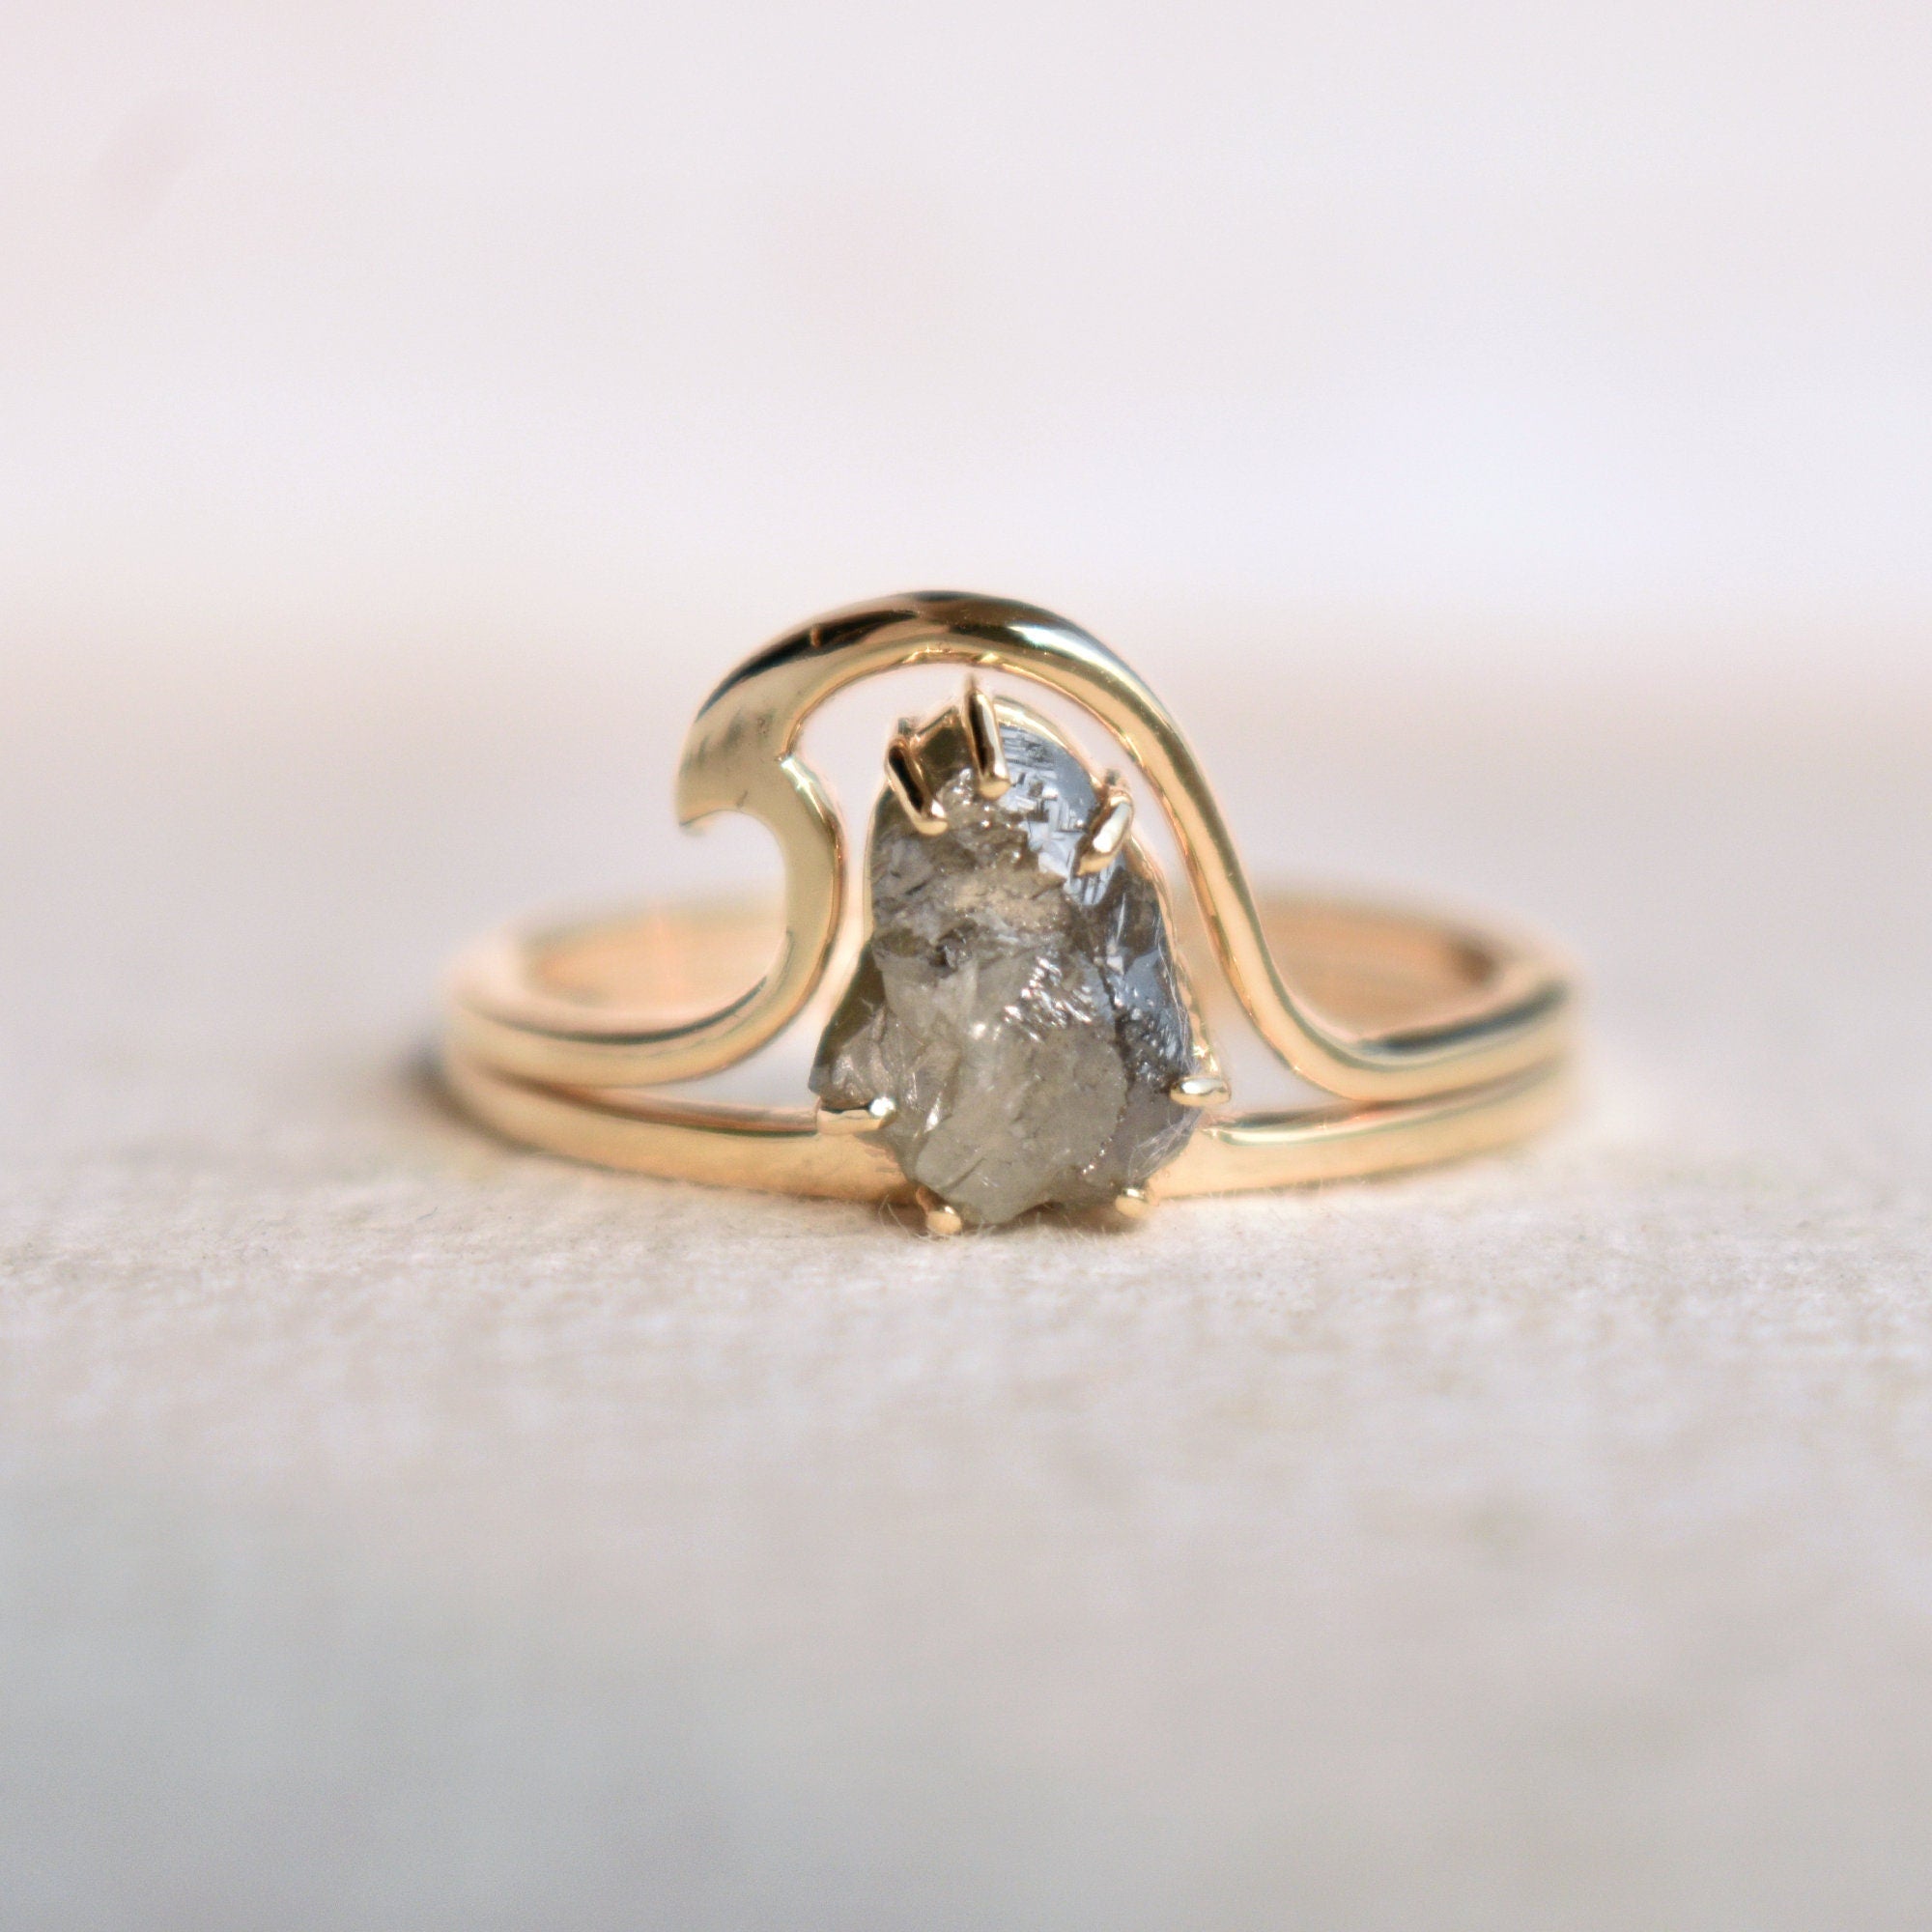 Gray Rough Diamond Wave Ring Set, 14K Solid Yellow Gold Rings, Ocean Tide Current Ring, Wave Surfer Proposal Engagement Ring, Ready to Ship